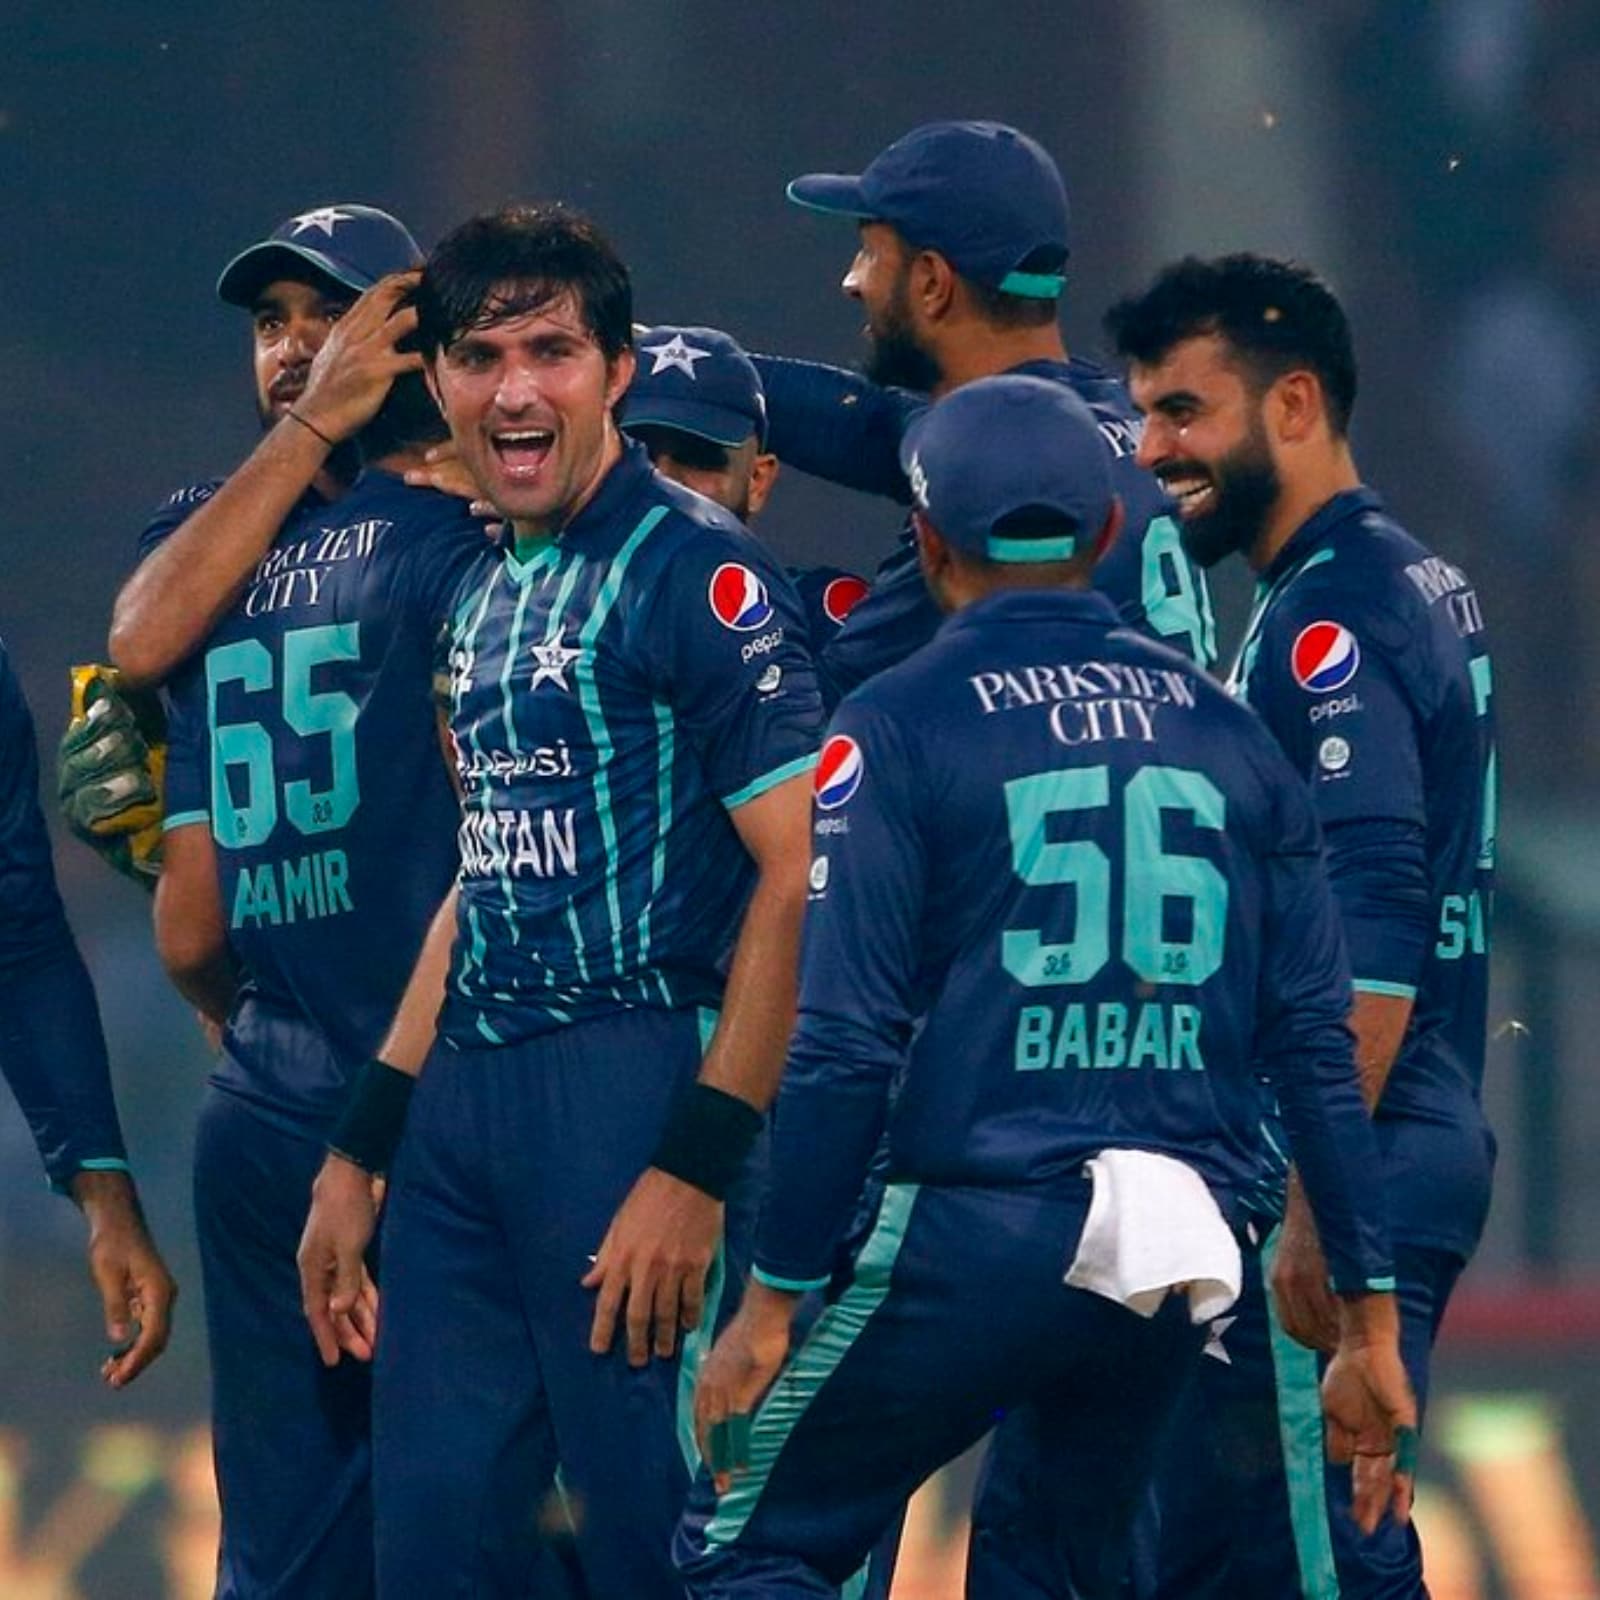 Pakistan vs England 2022, 6th T20I Live Cricket Streaming How to Watch PAK vs ENG Coverage on TV And Online